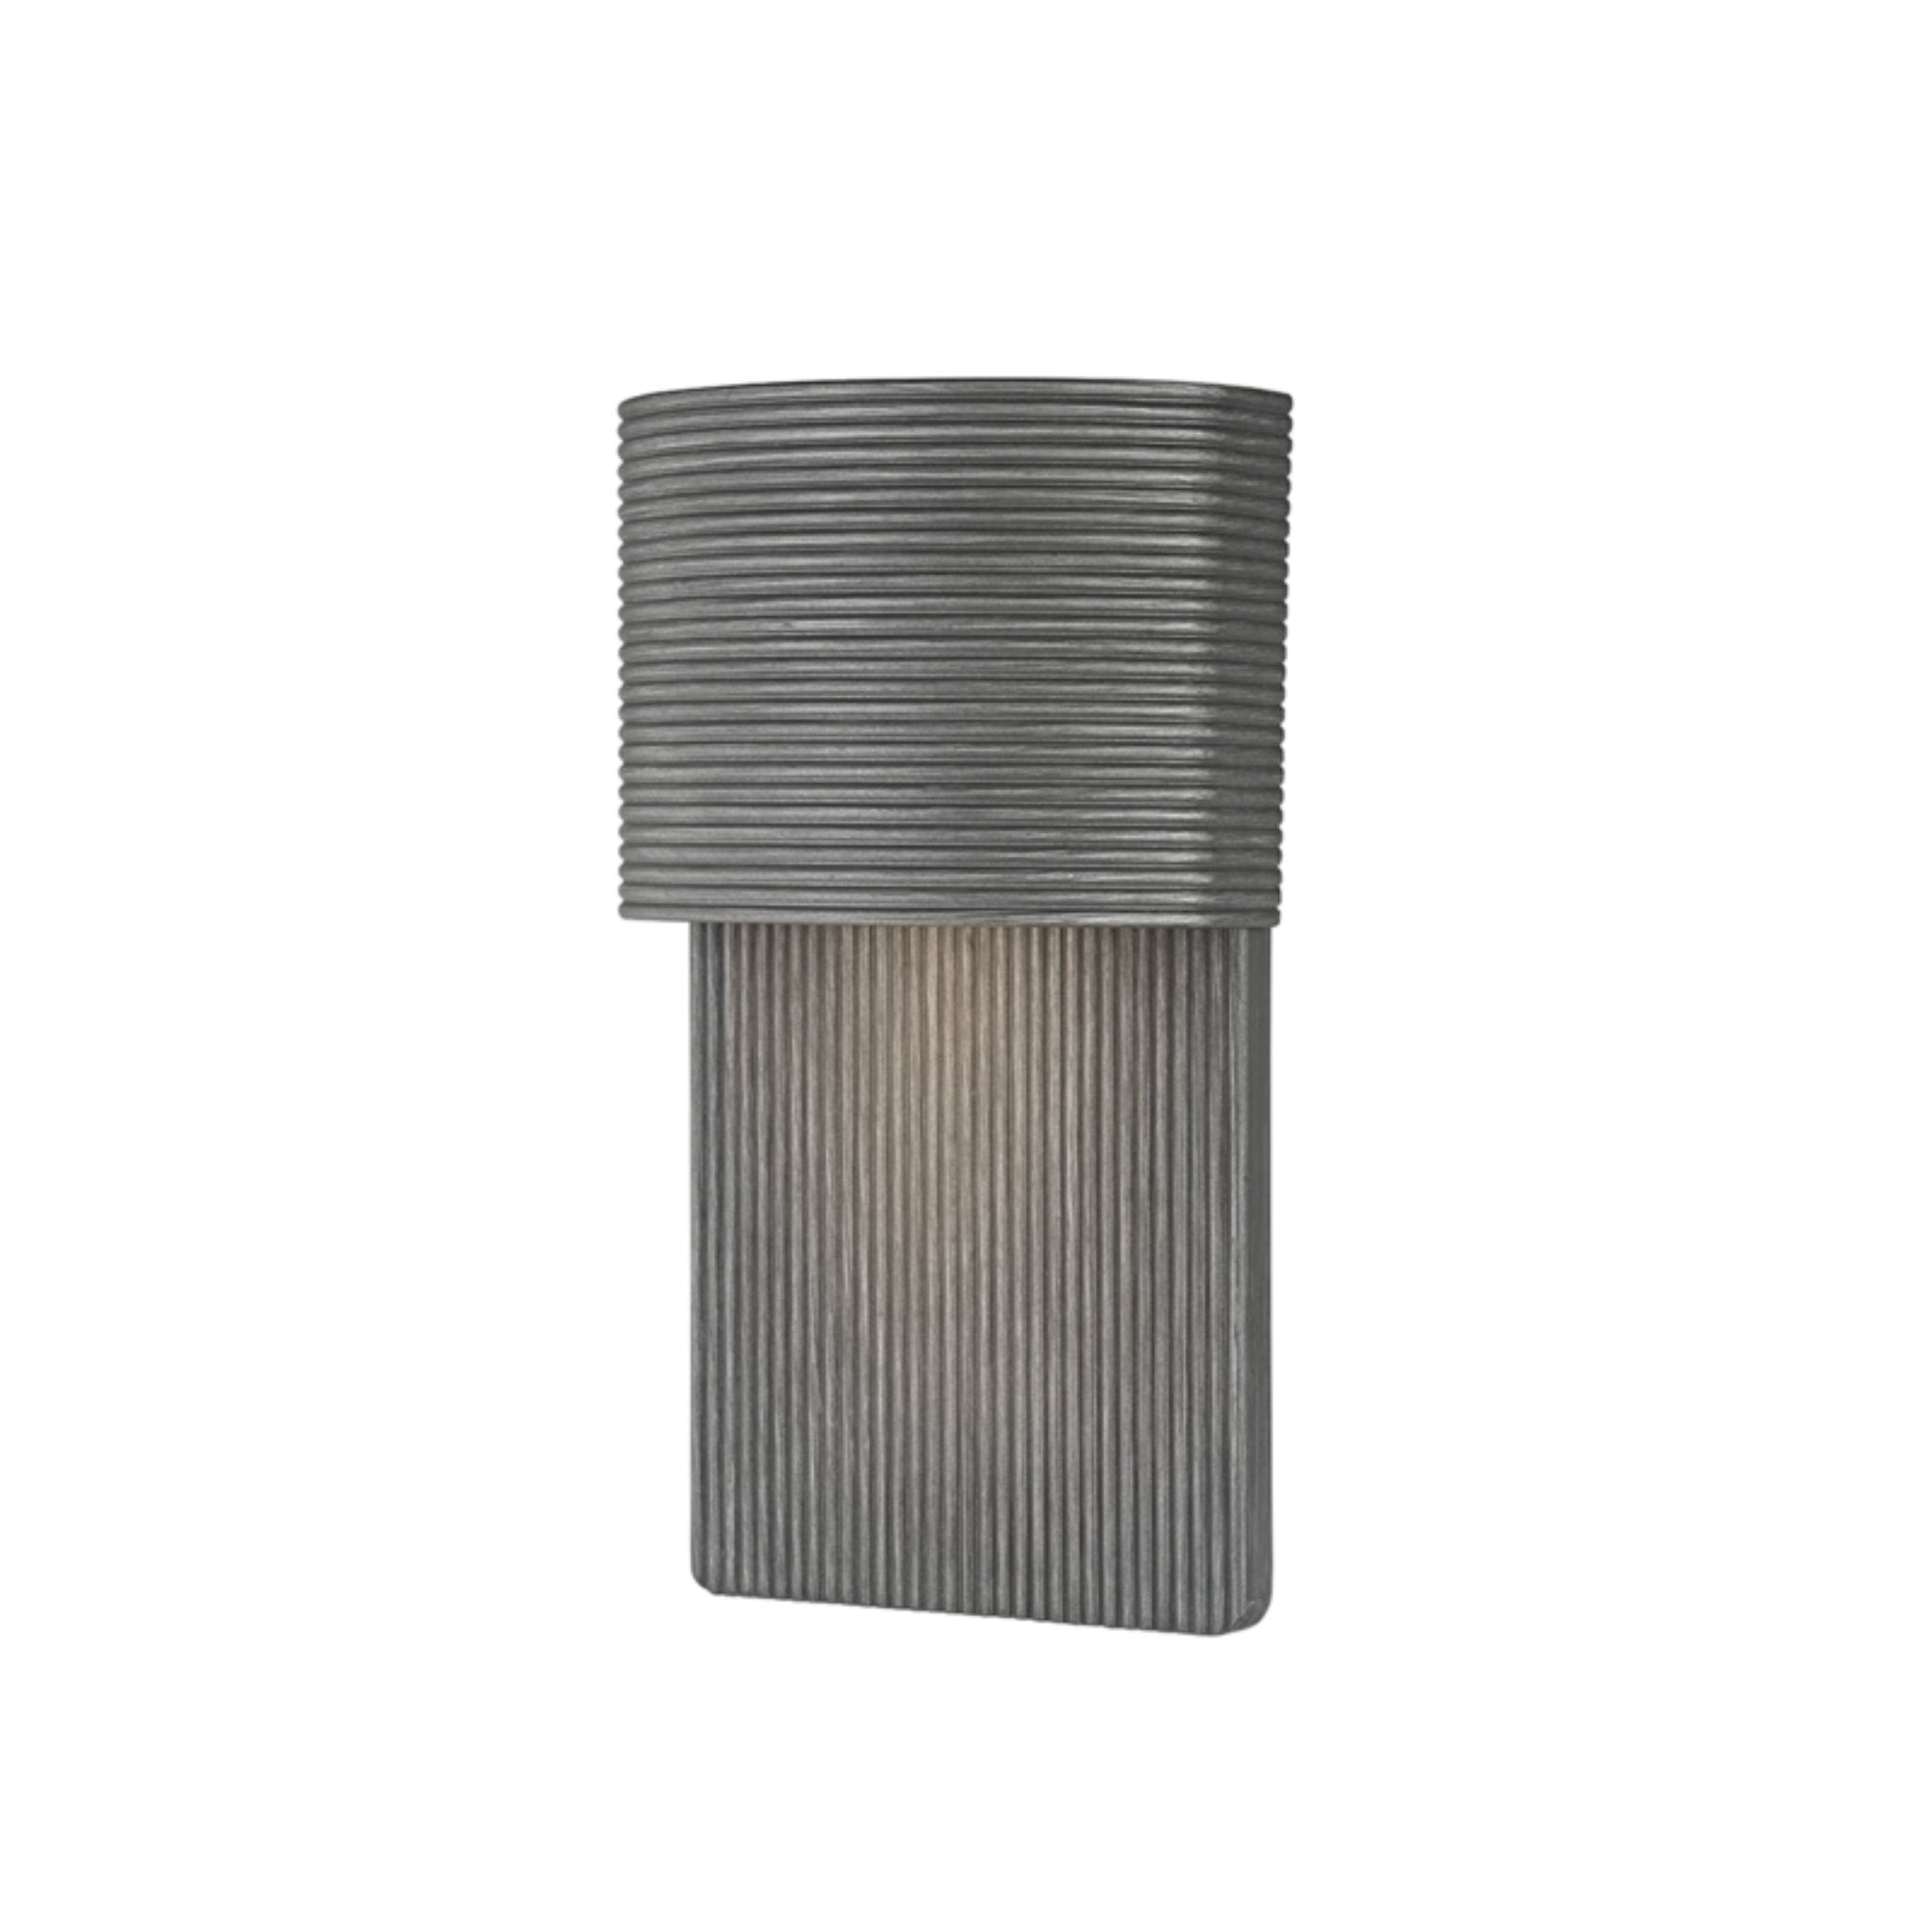 Tempe 1 Light Wall Sconce in Graphite